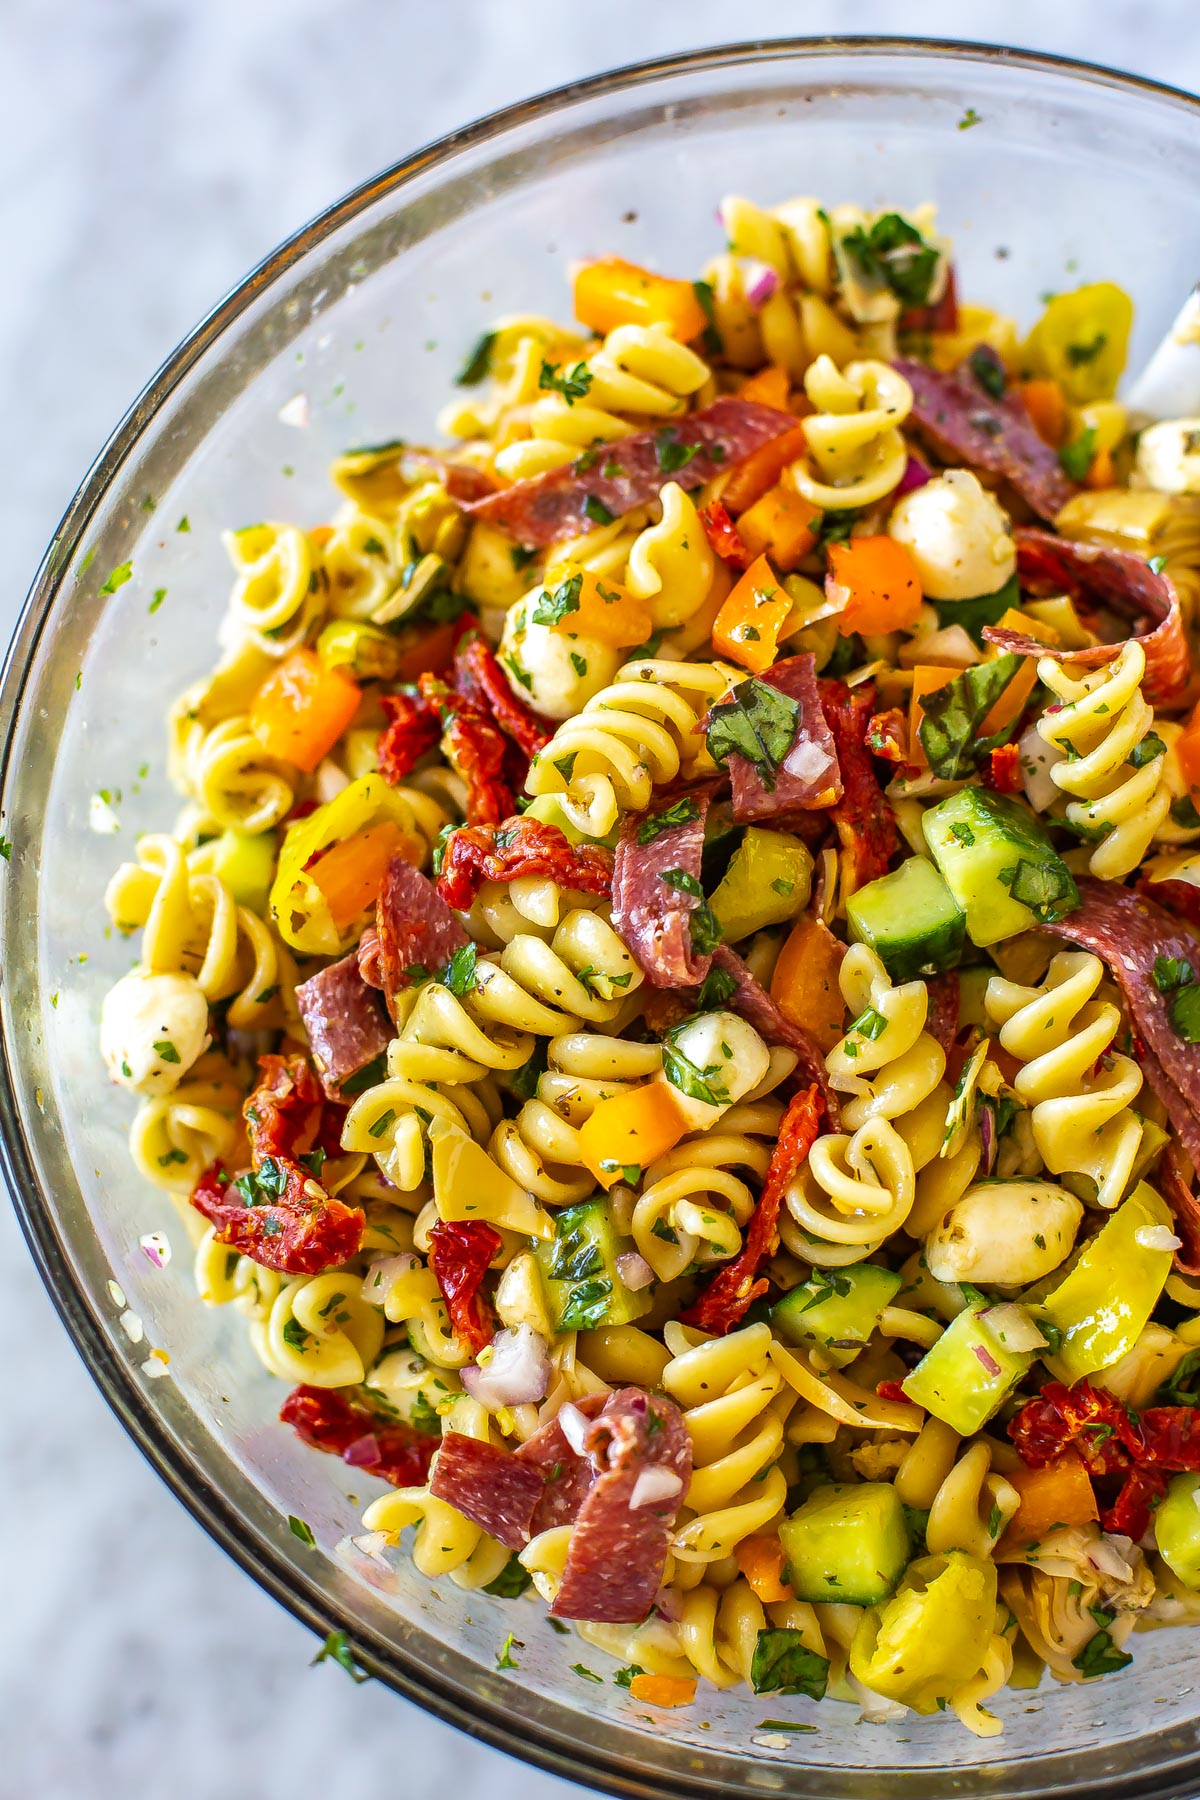 A close-up of a big bowl filled with Italian pasta salad.